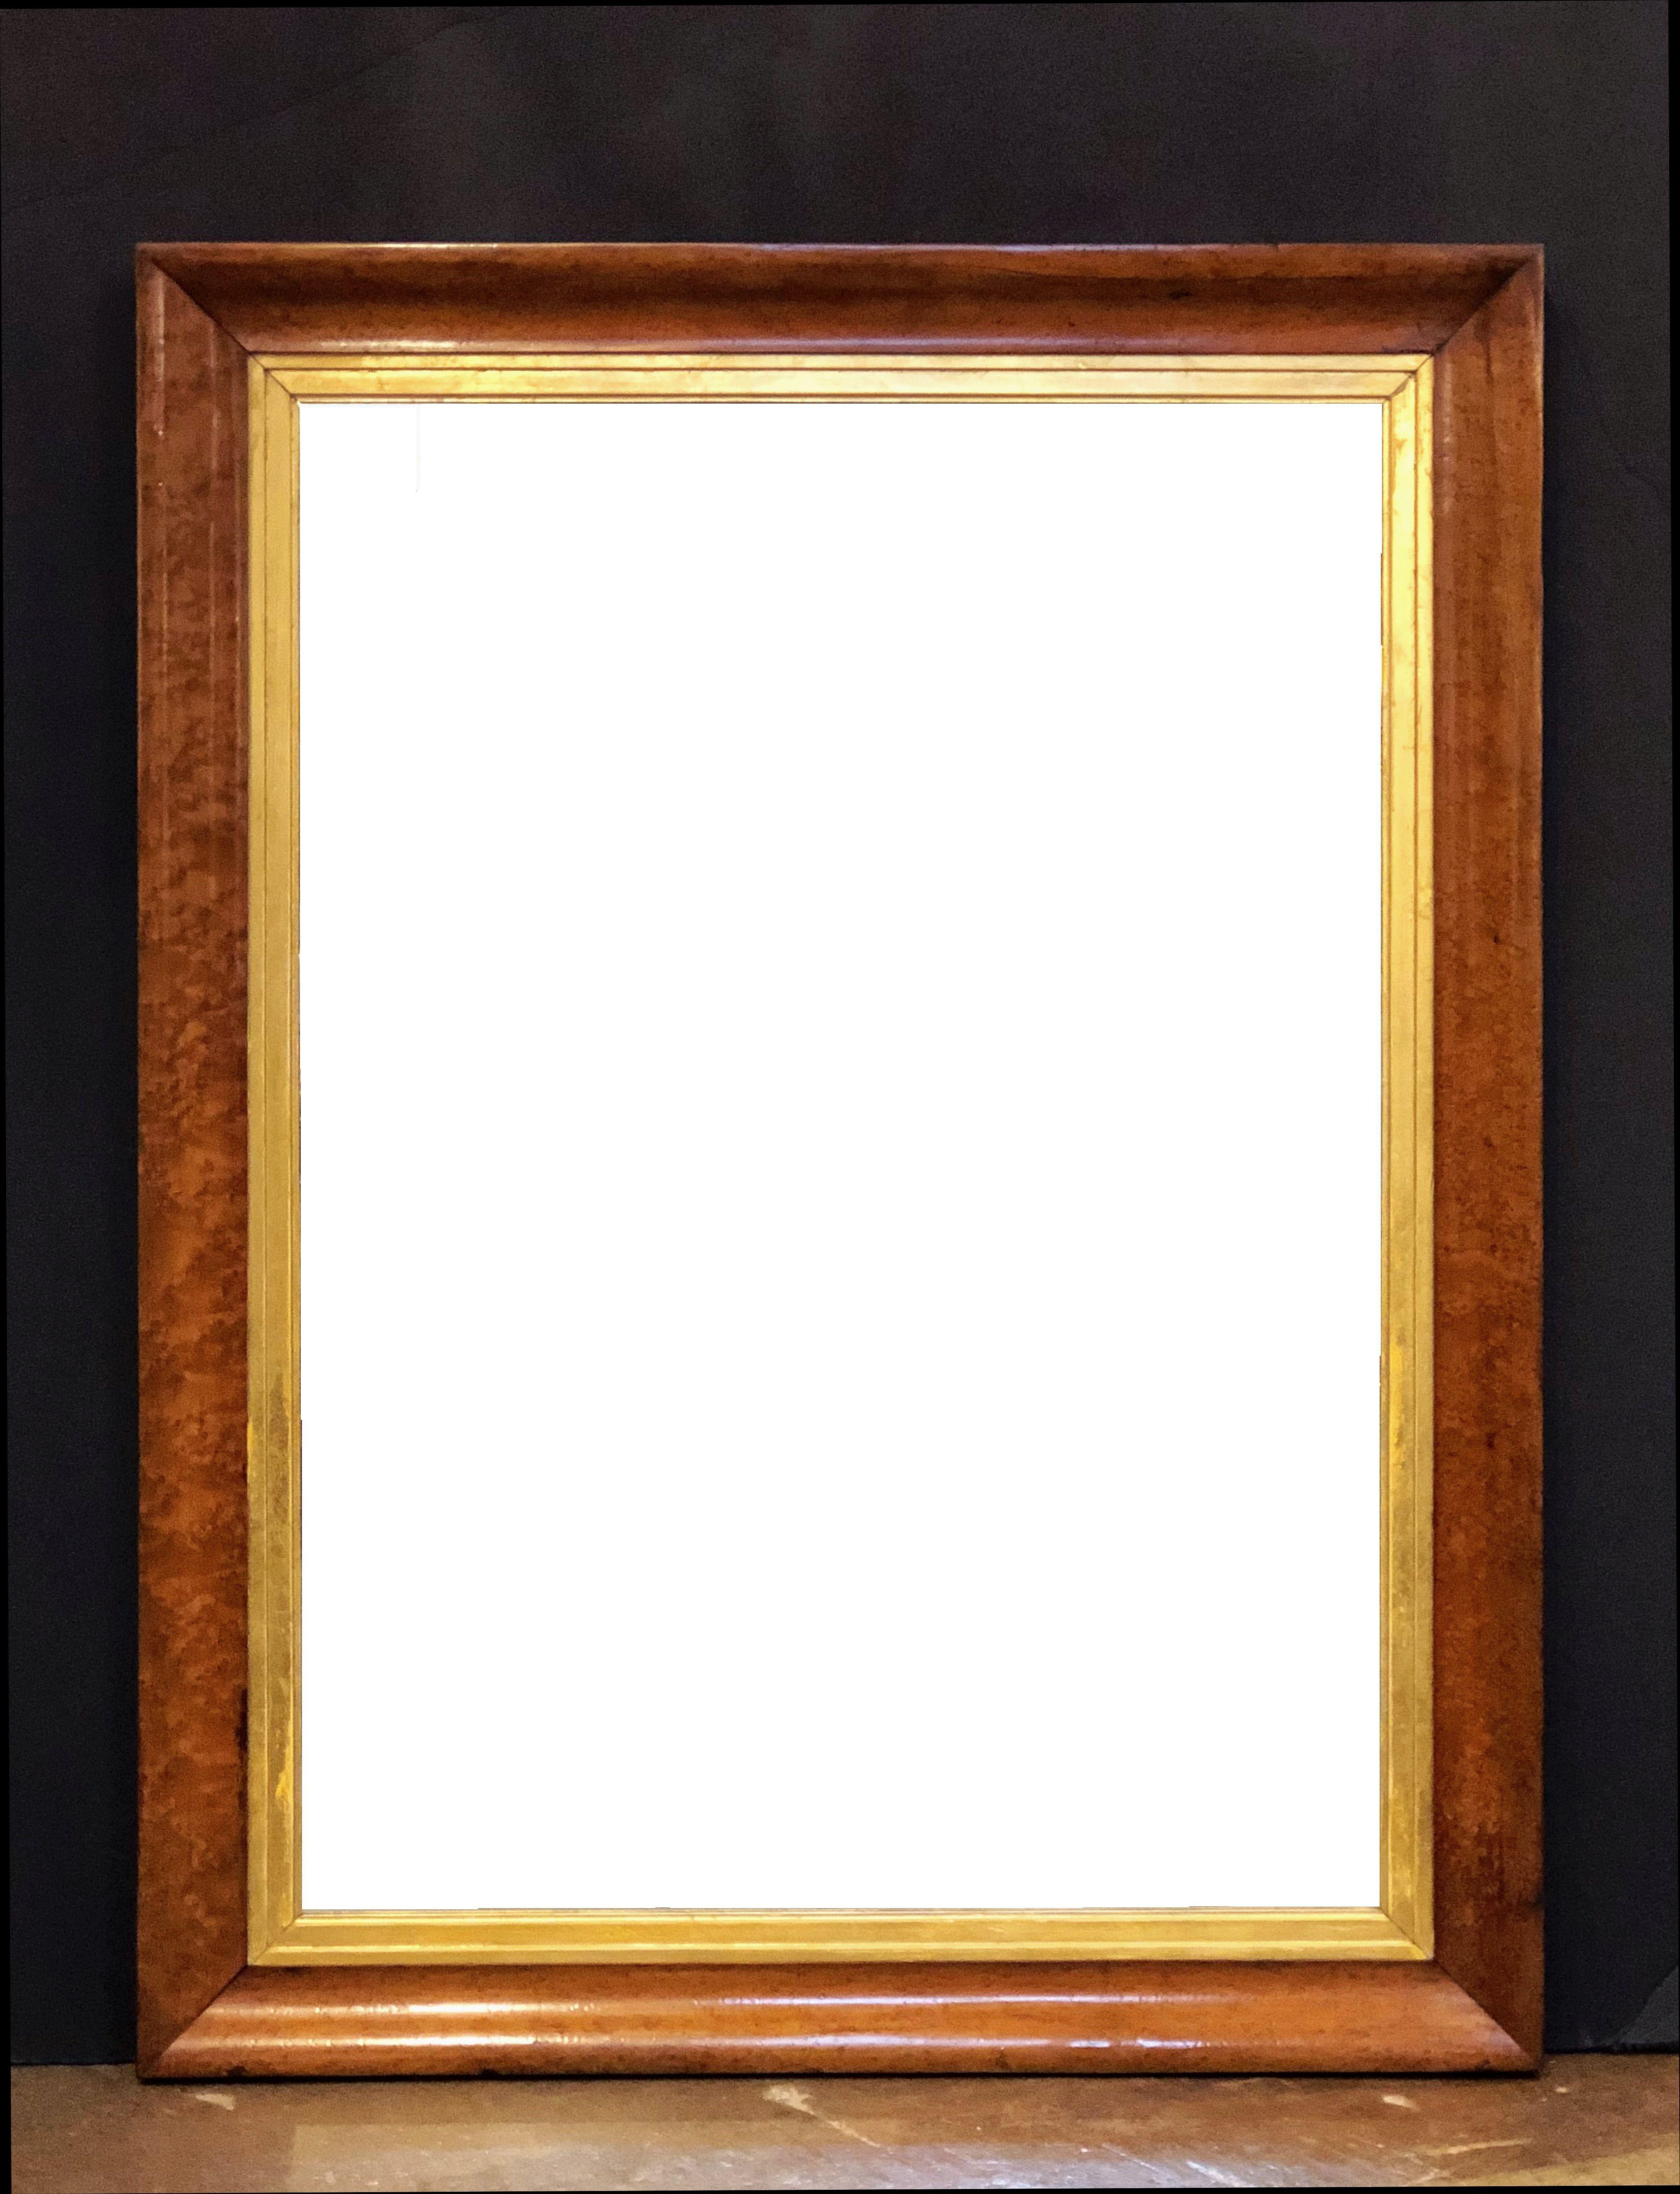 A fine English rectangular mirror featuring a bird’s-eye or curly maple frame with a gilt-wood 'slip' around the inner moulding.
Can be hung vertically or horizontally.

Dimensions: Height 41 3/4 inches x Width 31 7/8 inches x Depth 2 inches